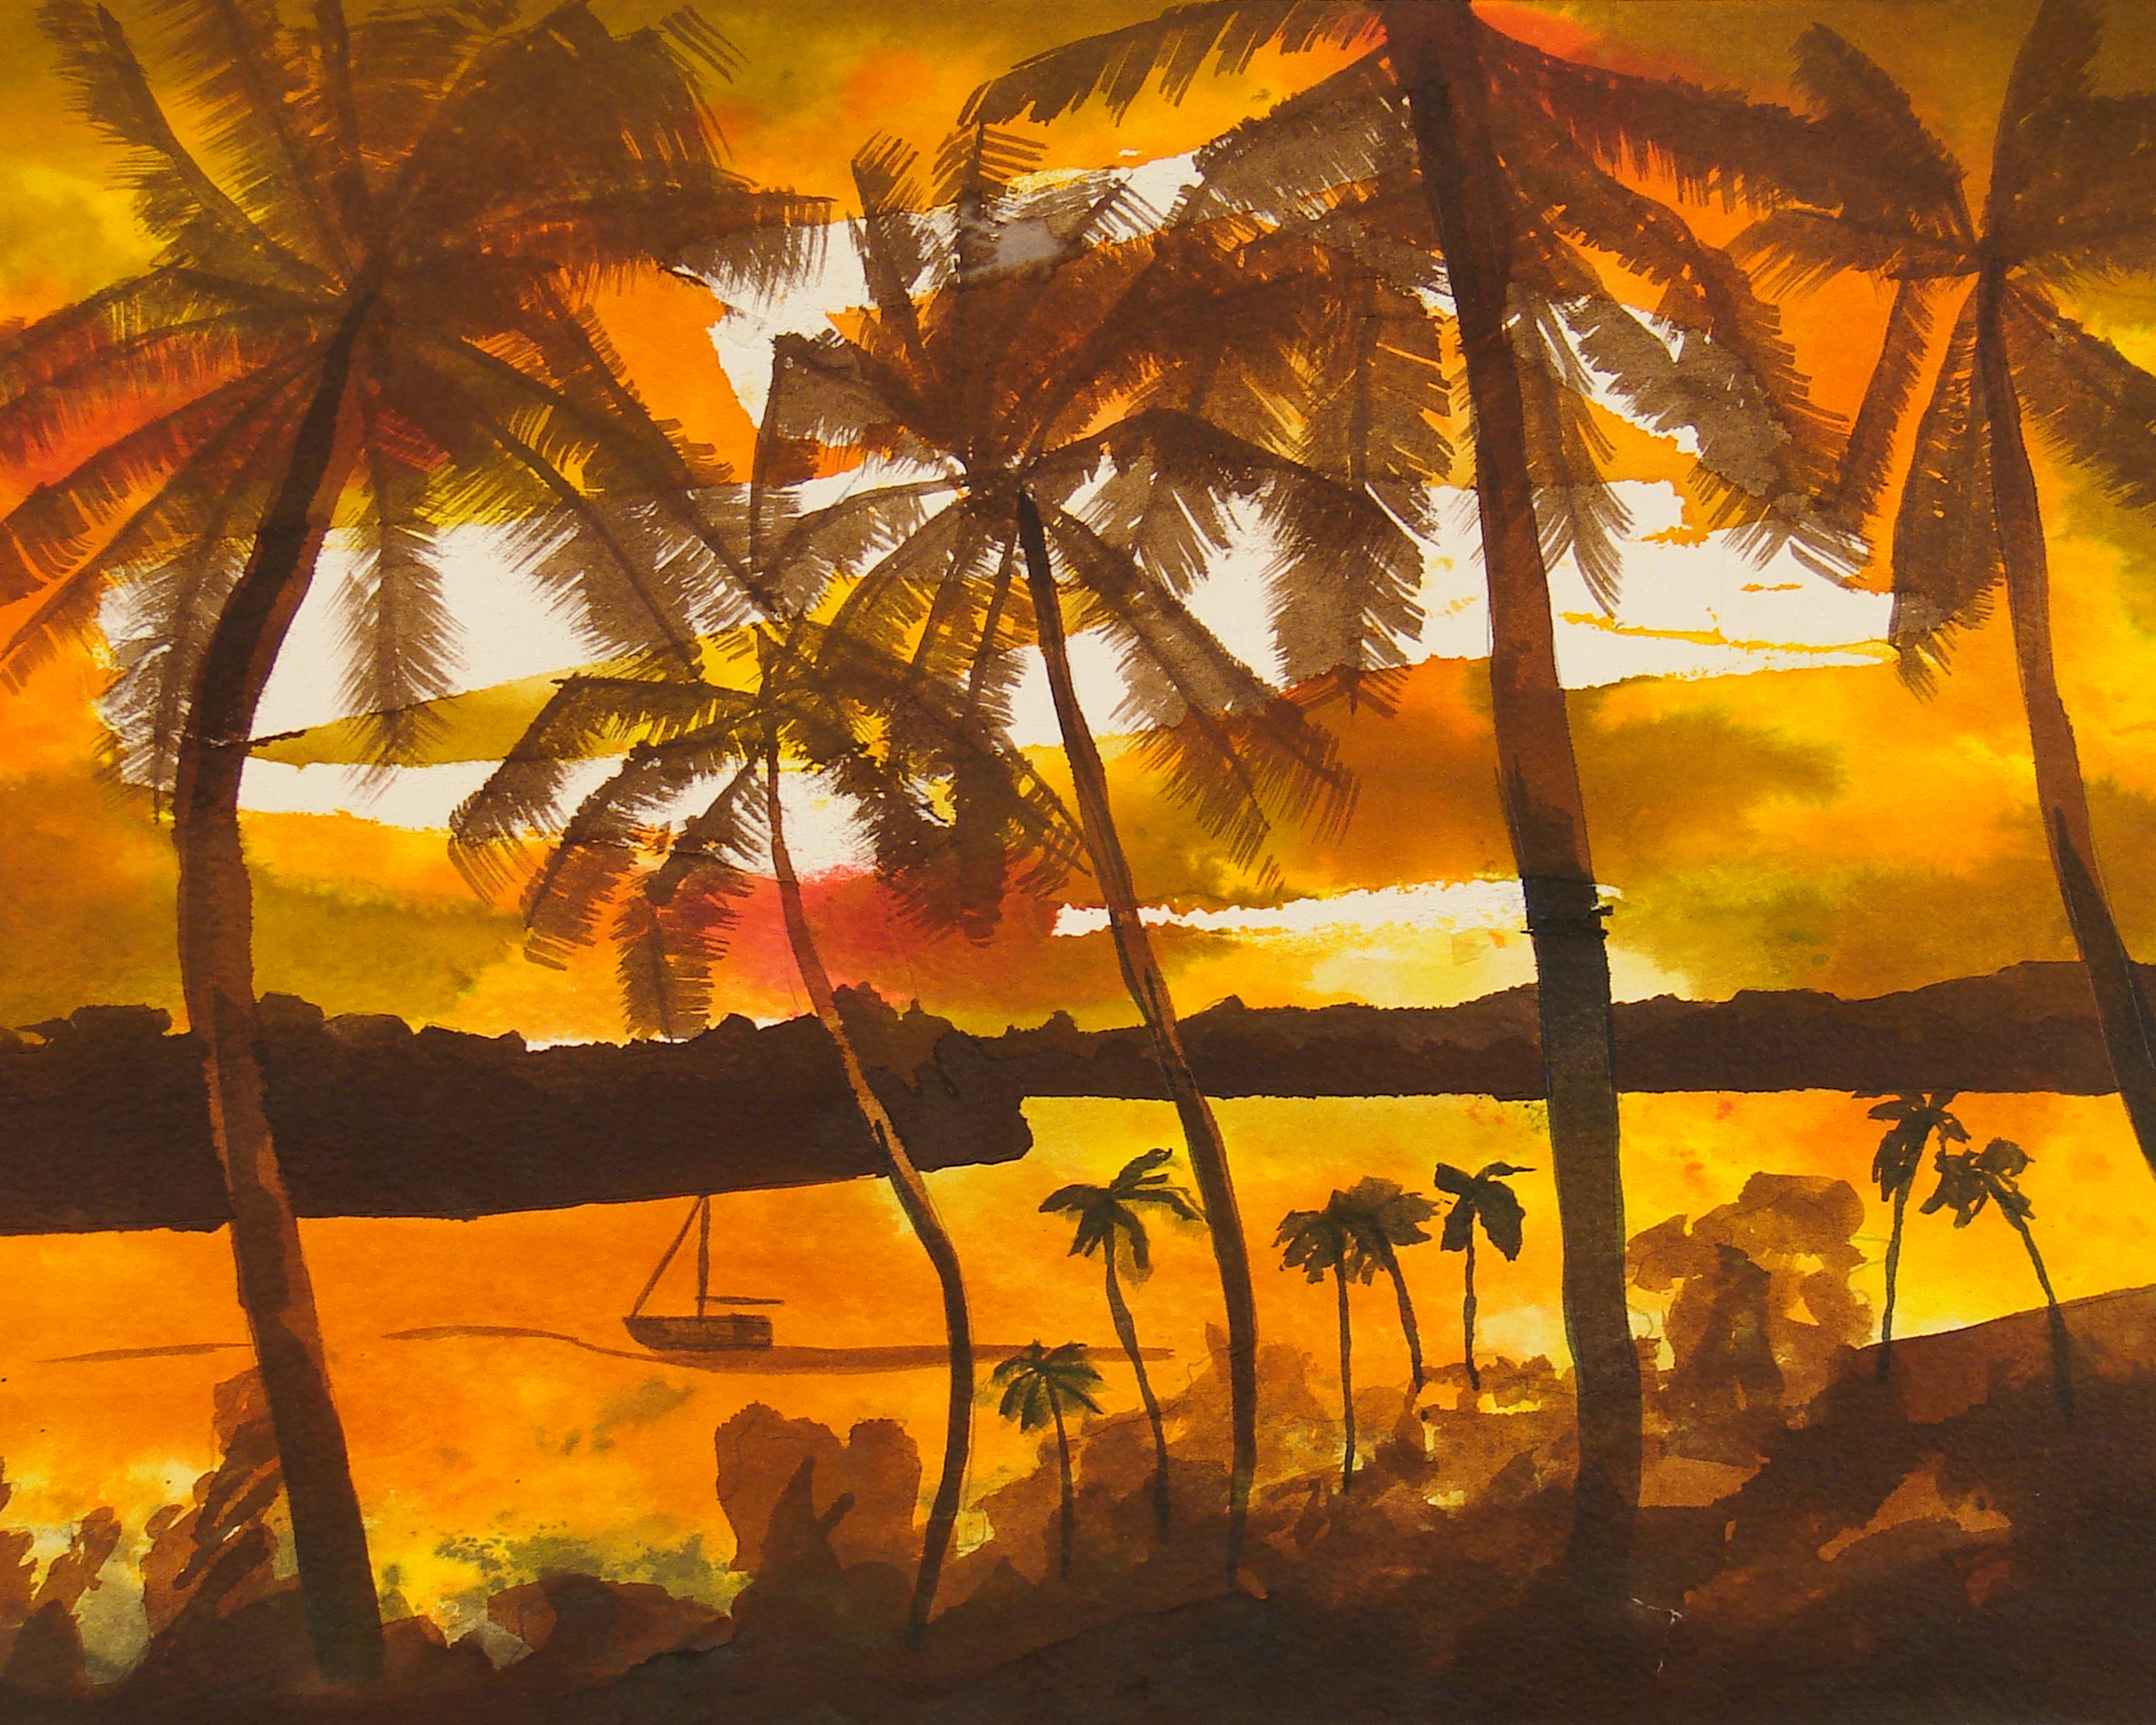 Pop's Tropics - an early experimental painting influenced by images of Hawaii